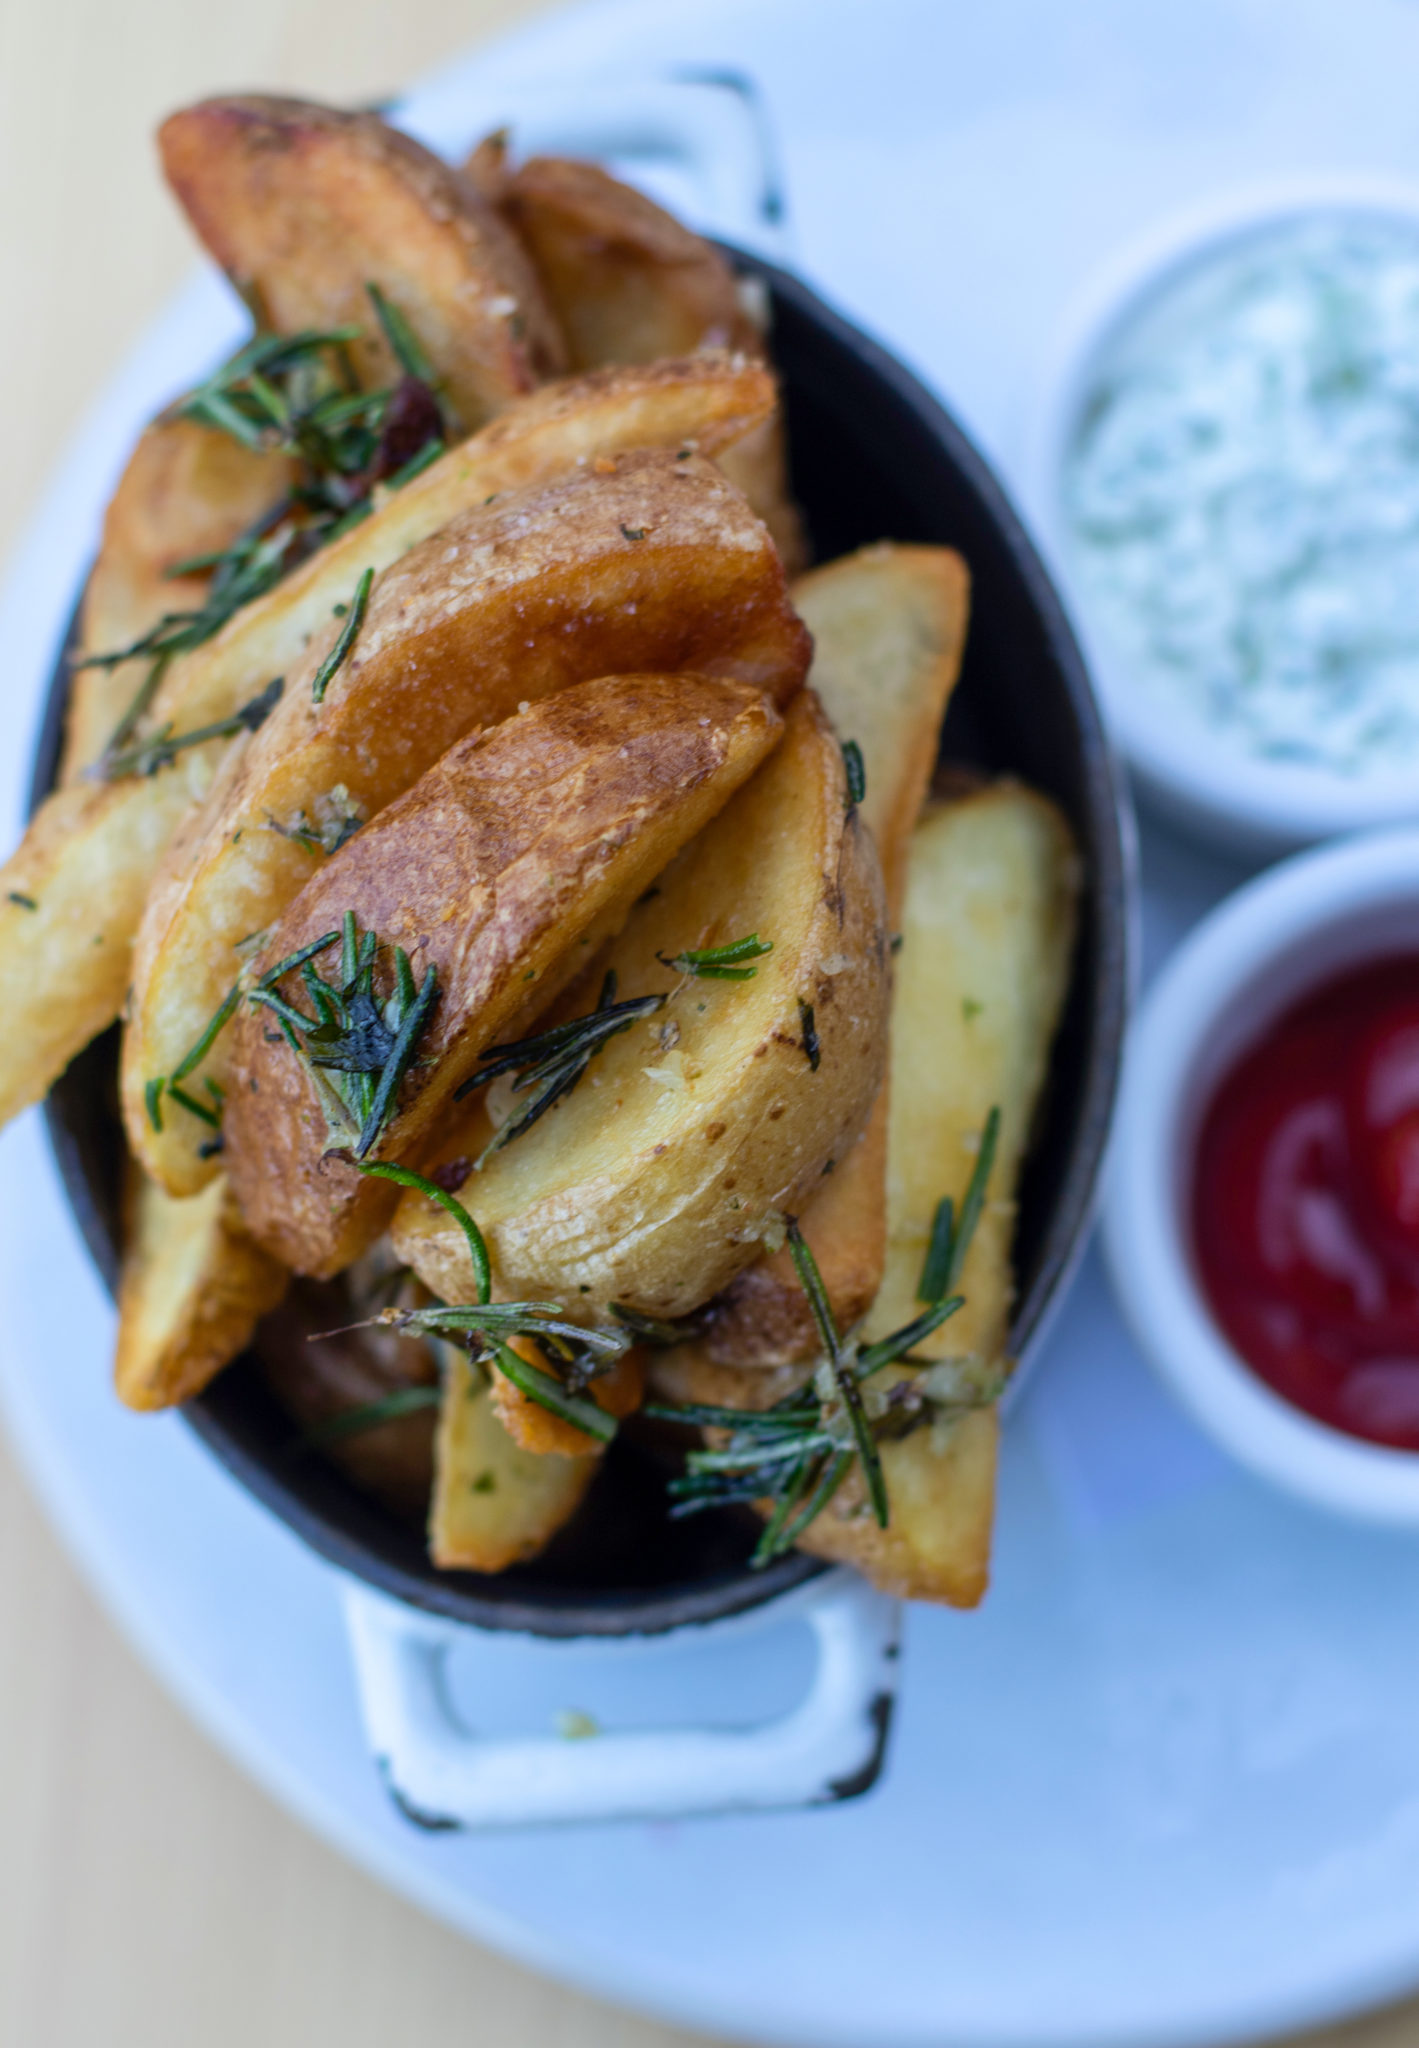 Duck fat fried potatoes with whipped ranch dip at Wit & Wisdom in Sonoma. (Heather Irwin / The Press Democrat)